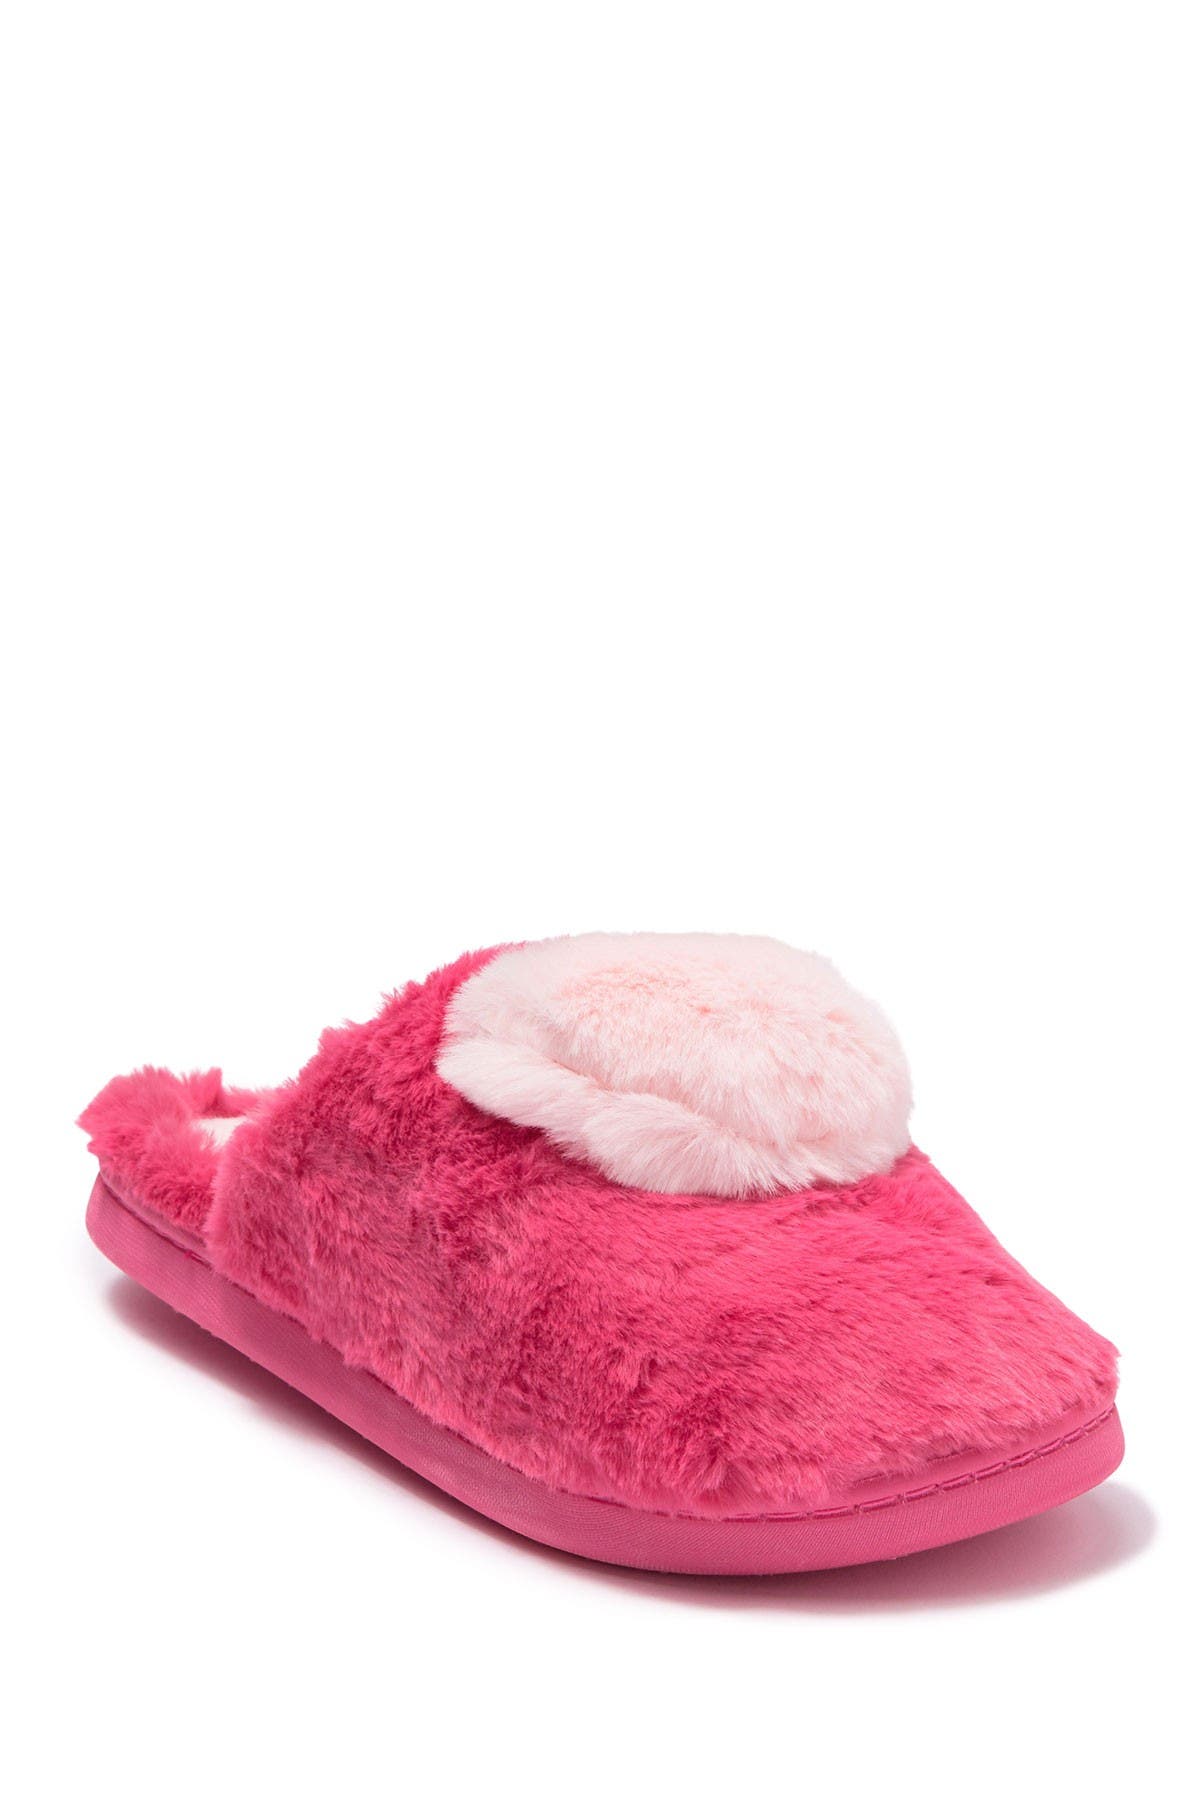 clearance slippers